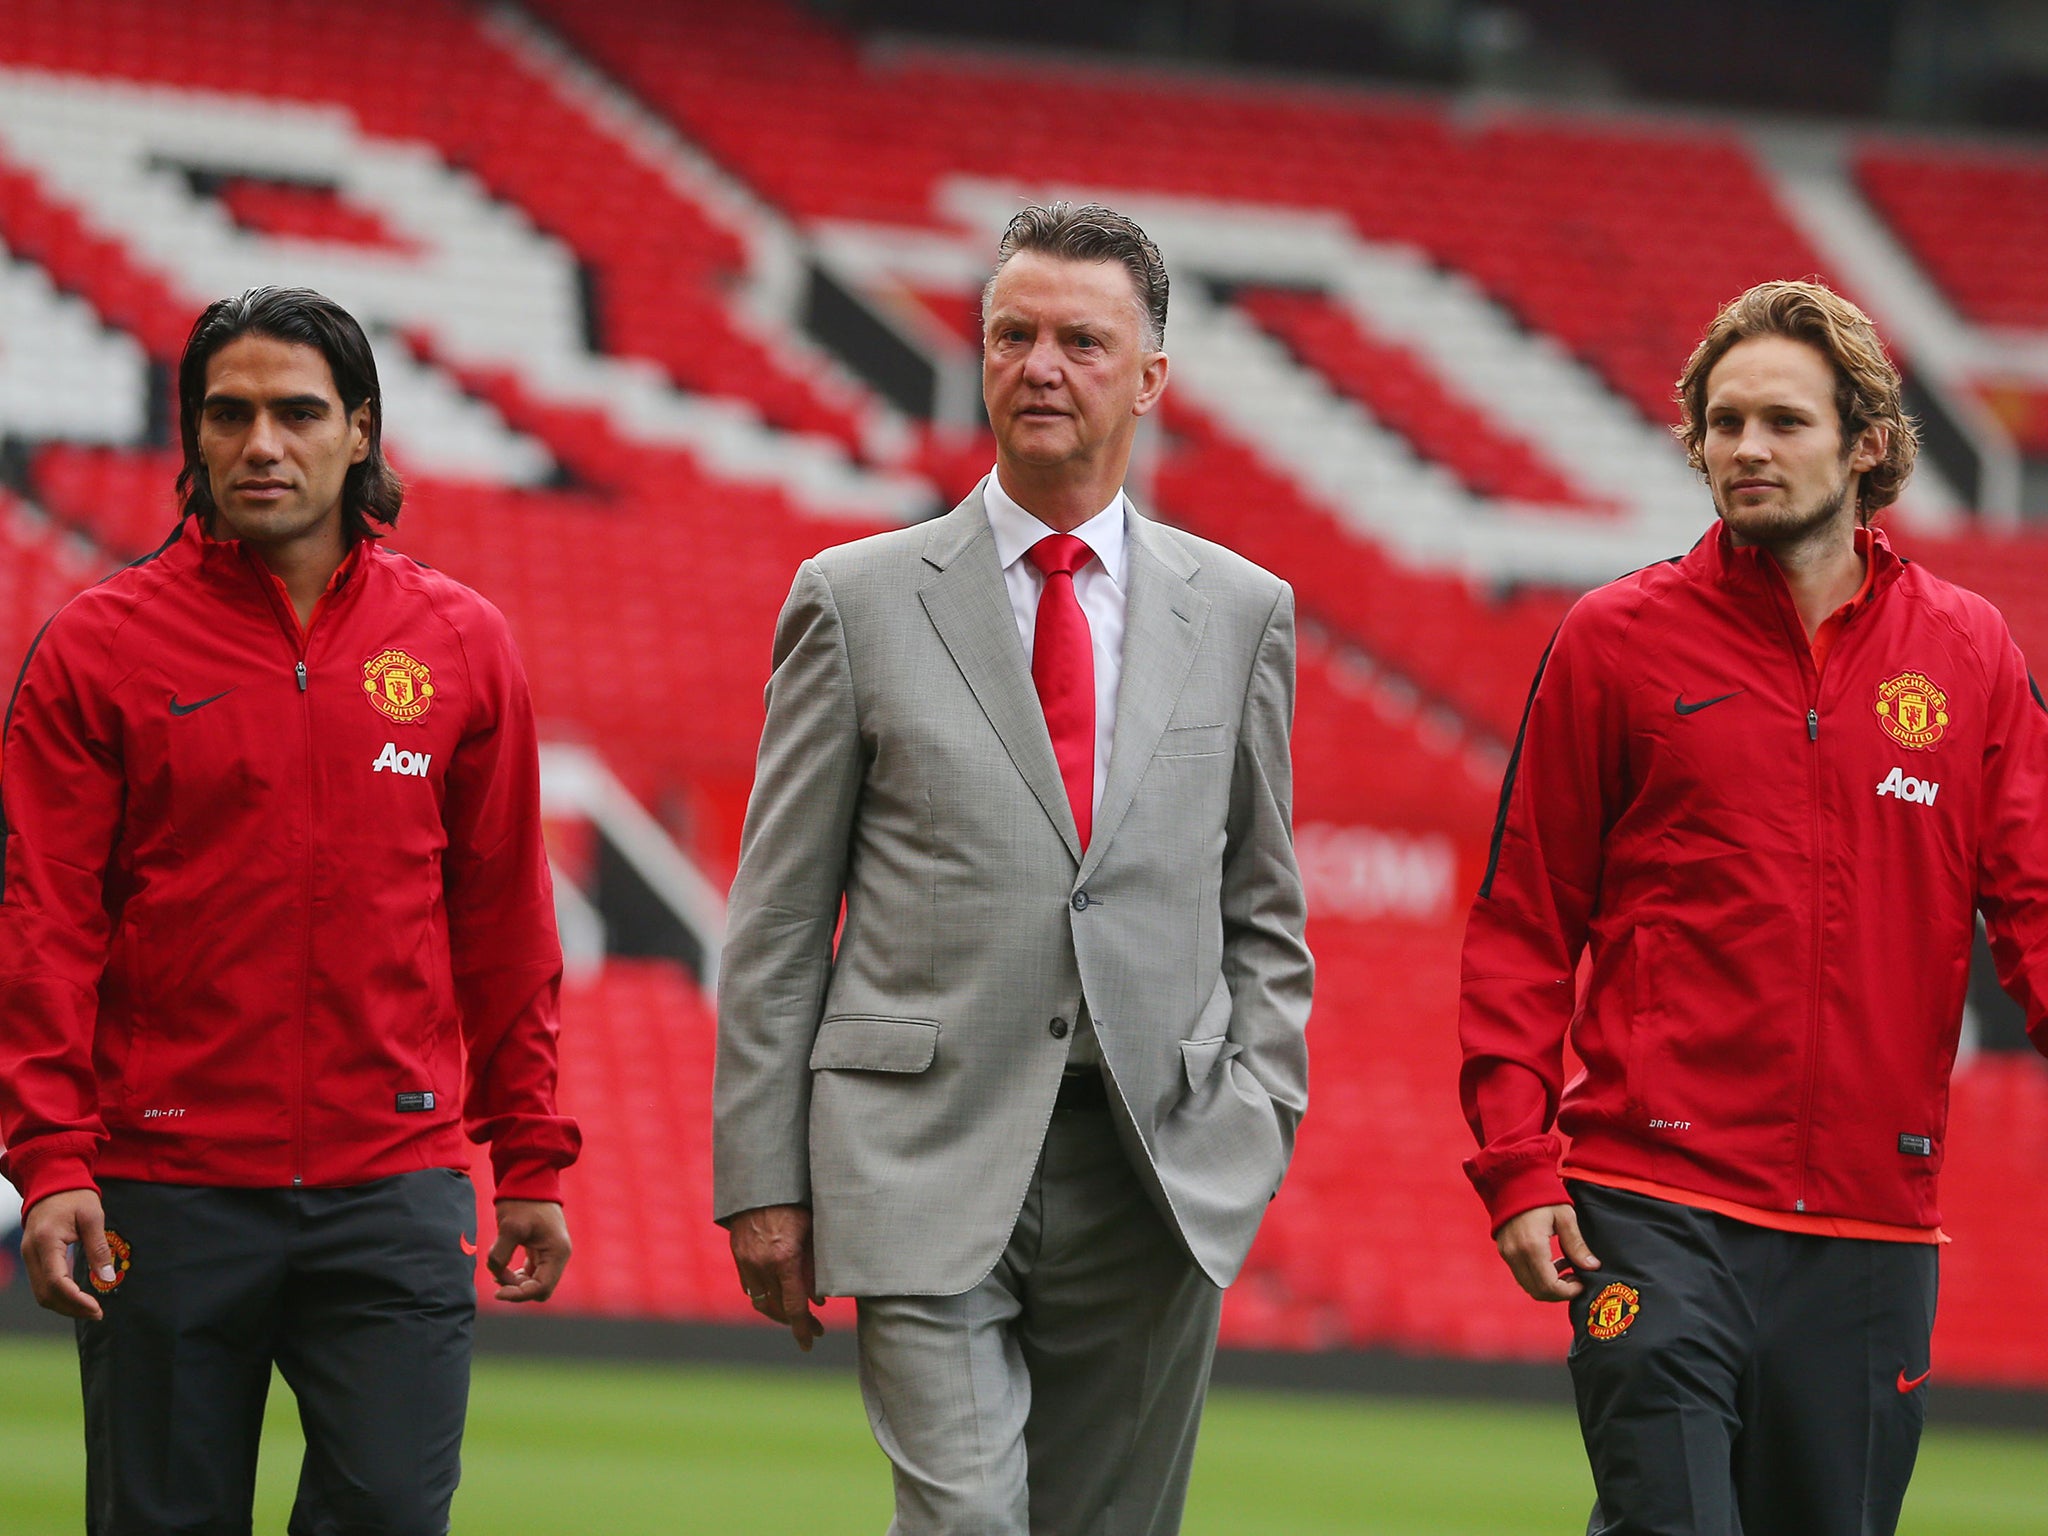 Manchester United manager Louis van Gaal (centre) with his new signings Radamel Falcao (left) and Daley Blind during a photocall at Old Trafford